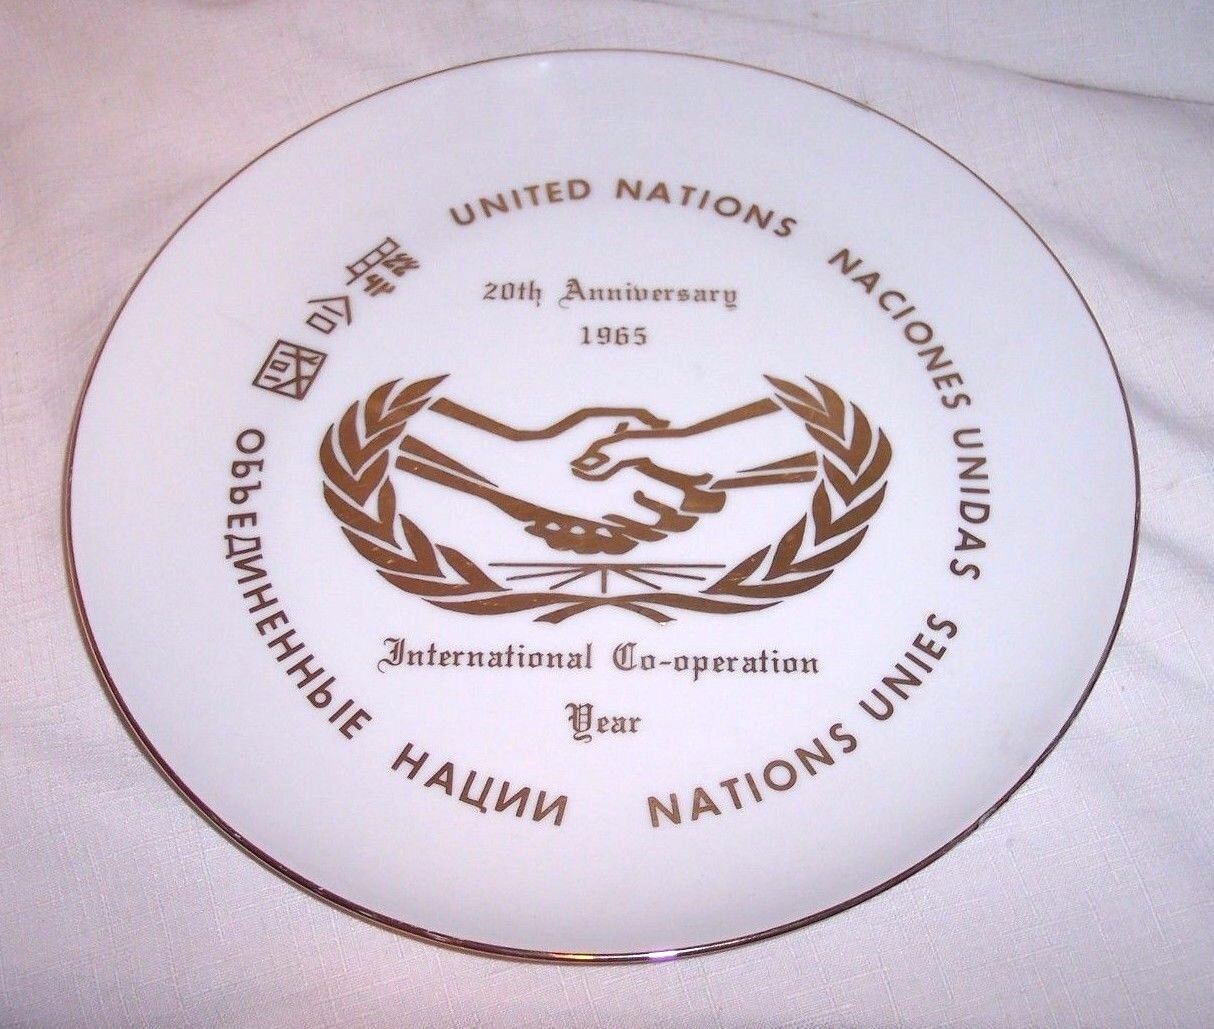 1965 20TH ANNIVERSARY UNITED NATIONS INTERNATIONAL CO-OPERATION 20 YEAR PLATE